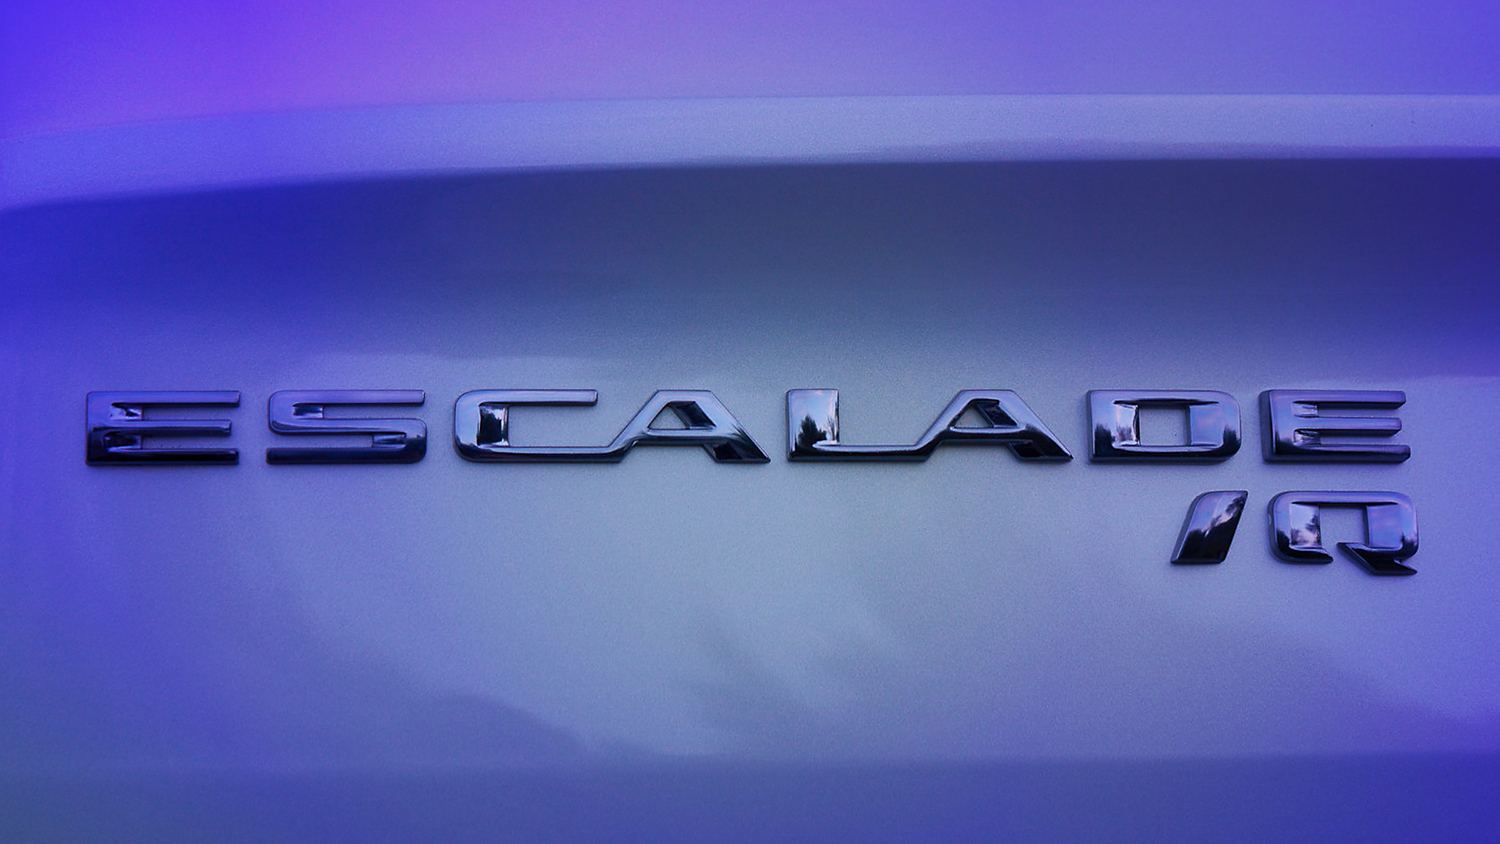 A close-up of the Cadillac ESCALADE IQ name badge seen on the vehicle. Preproduction model shown.